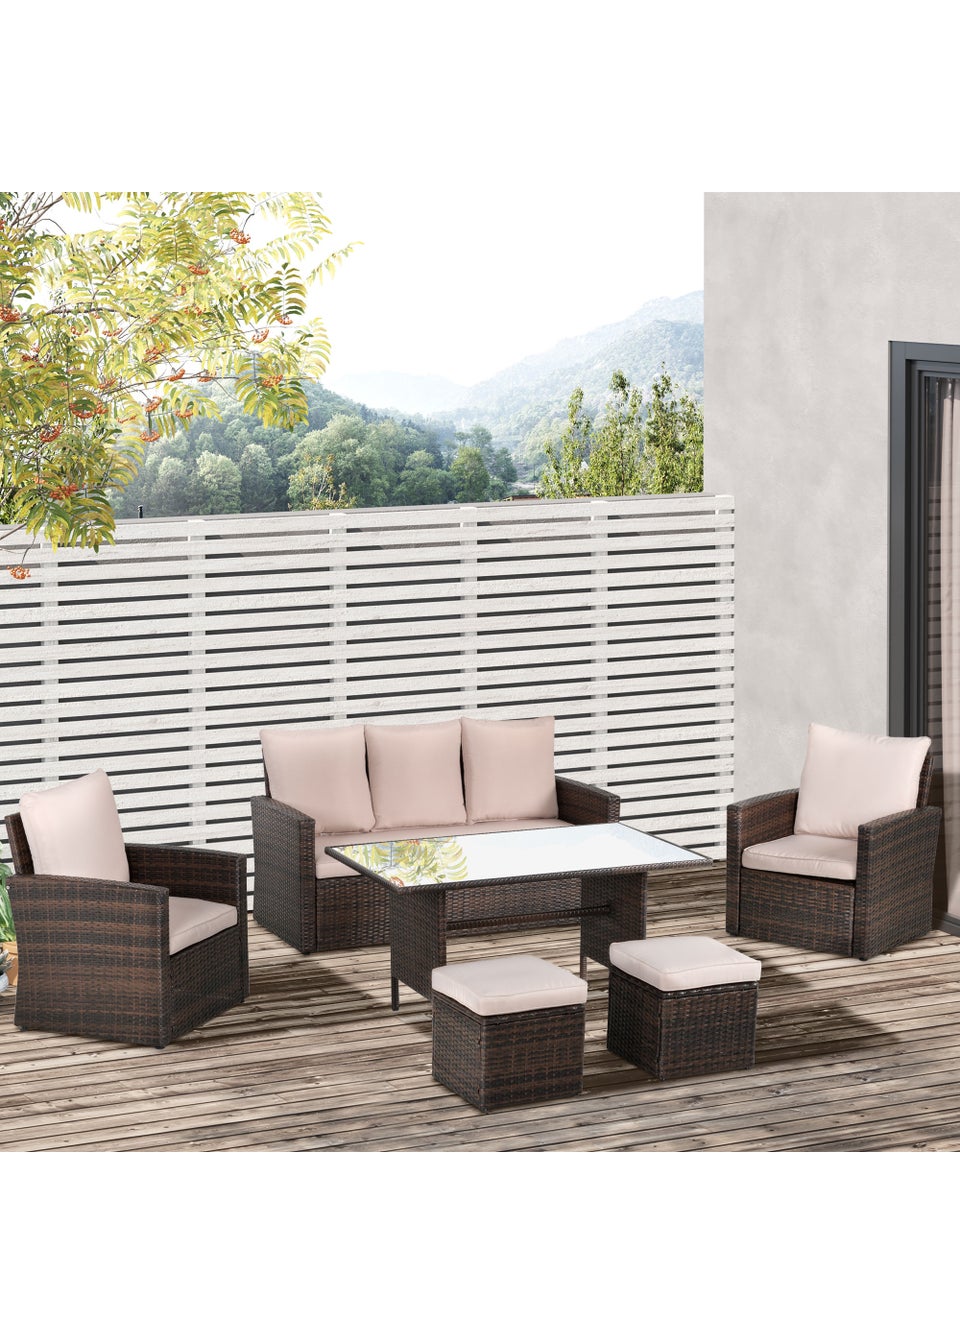 Outsunny 6 Piece Rattan Wicker Garden Furniture Set with Dining Table